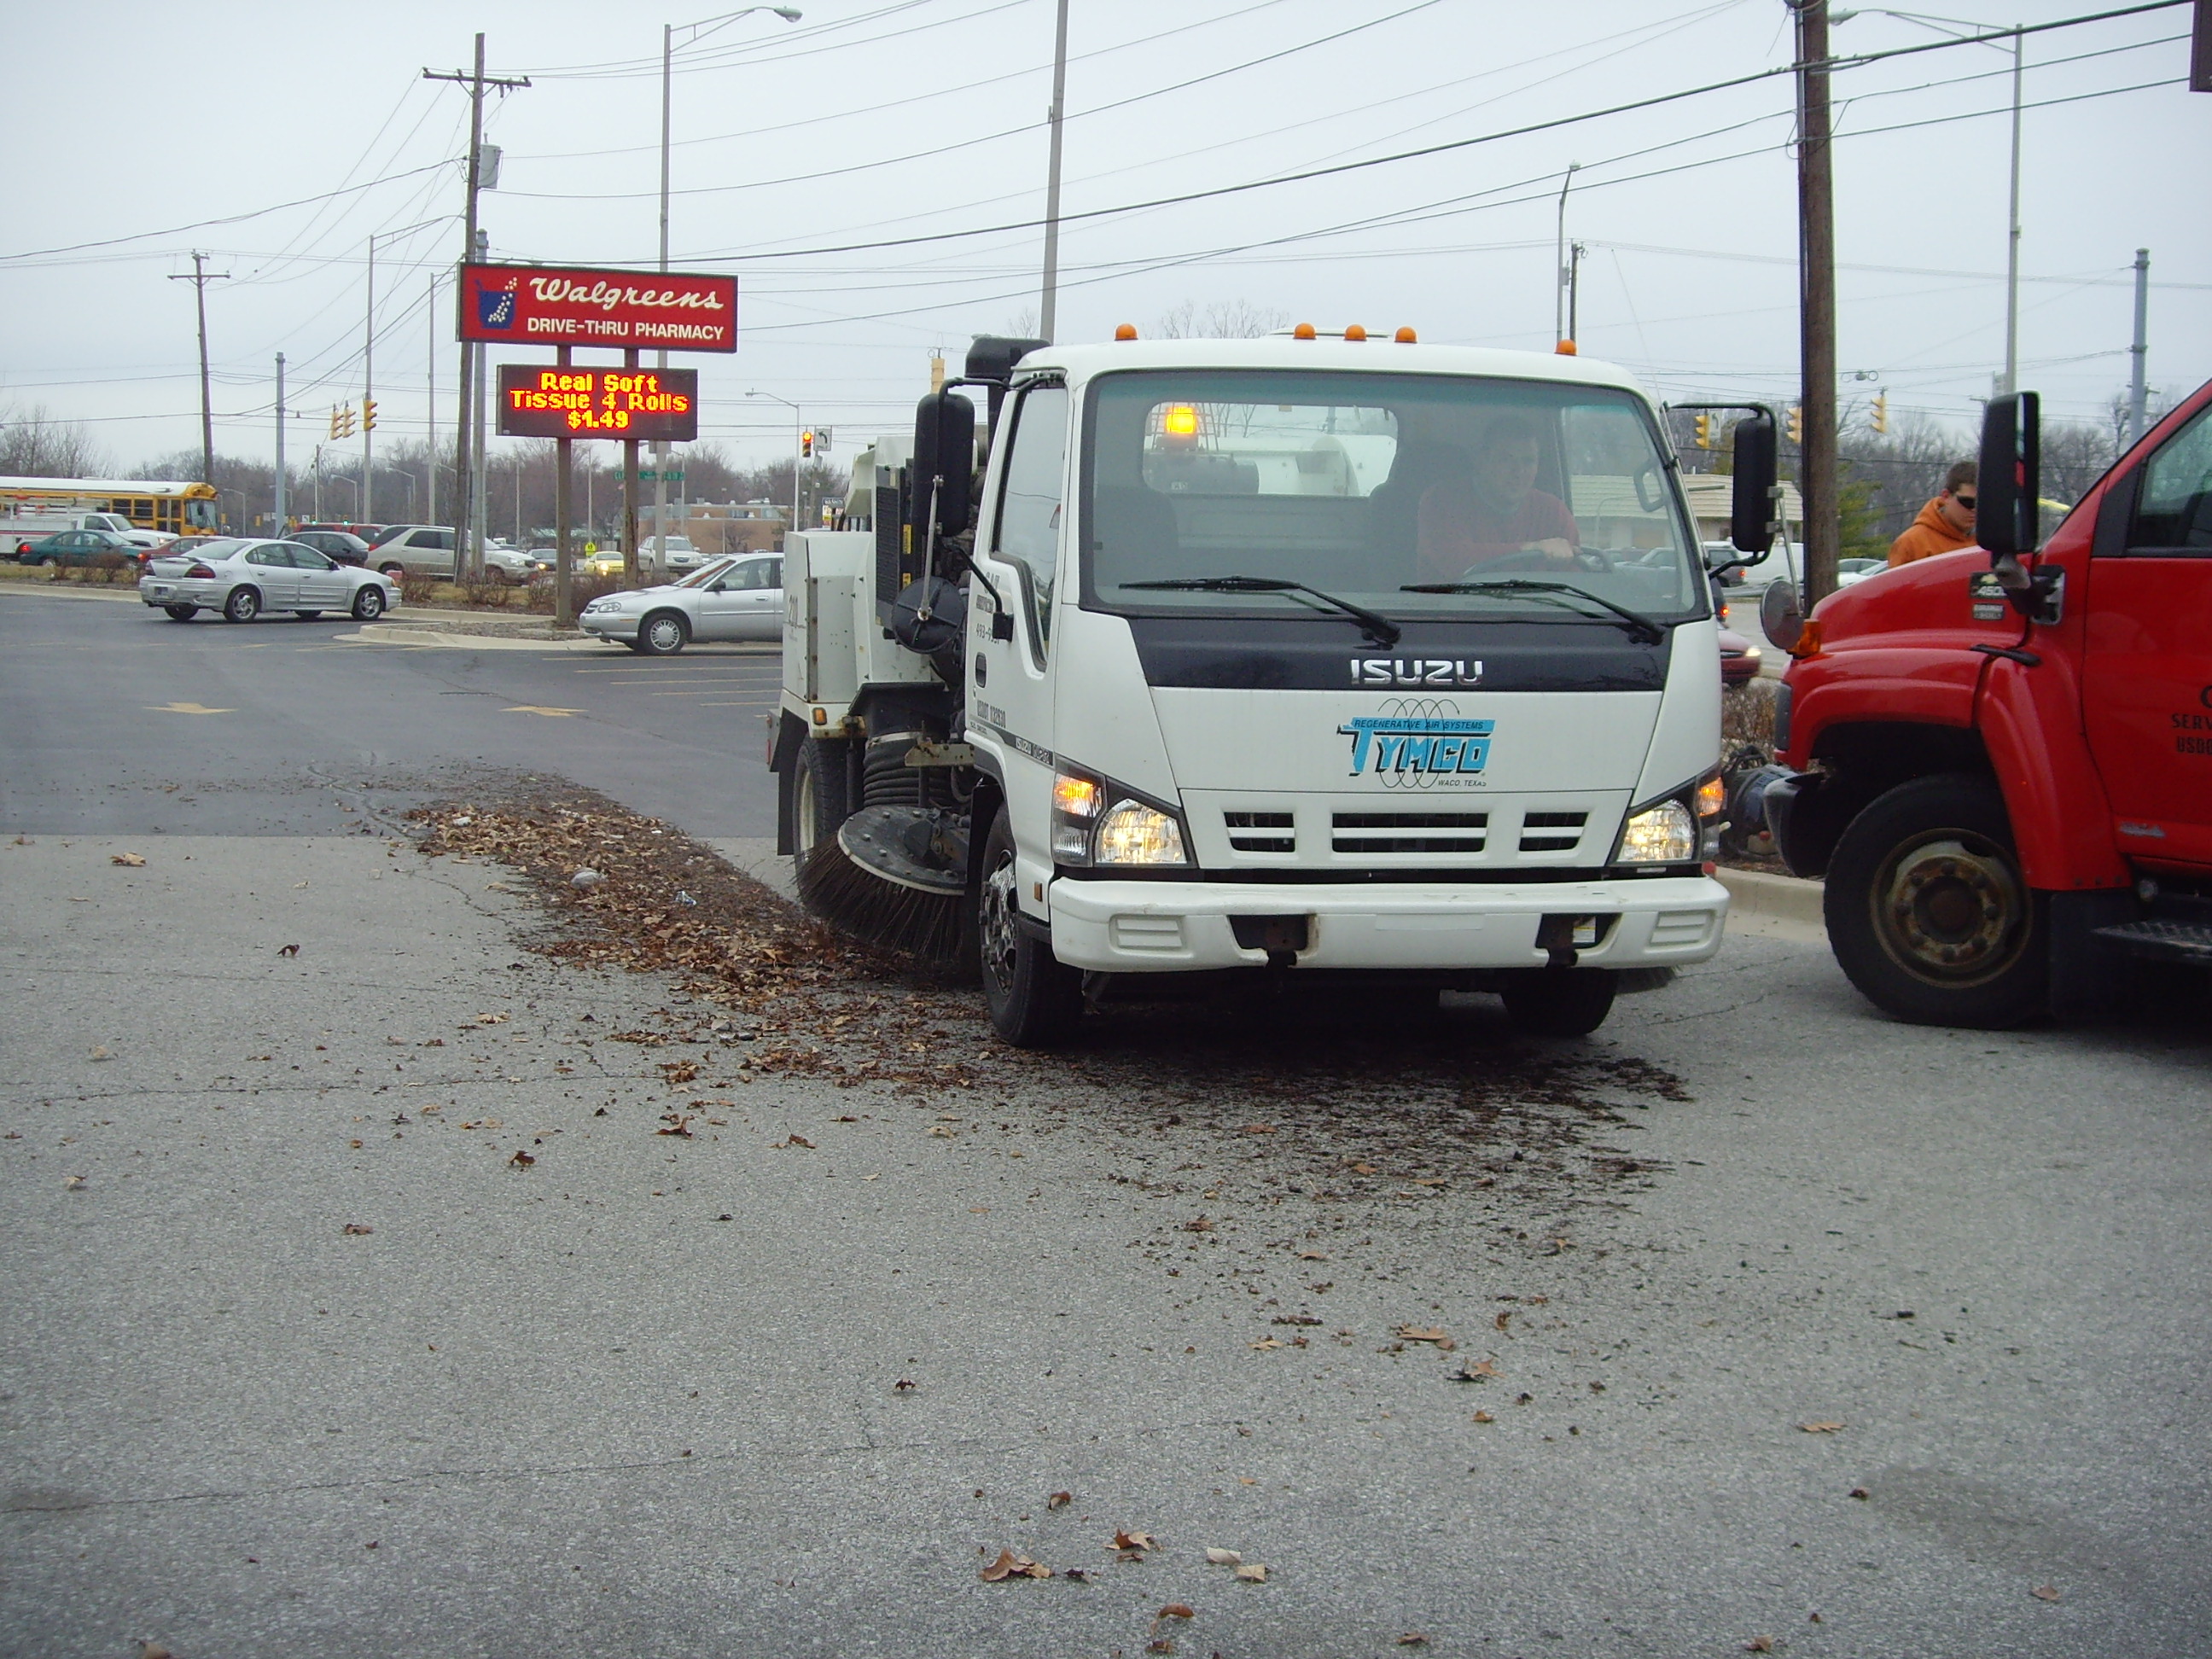 Sweeper truck clearing leaves from parking lot